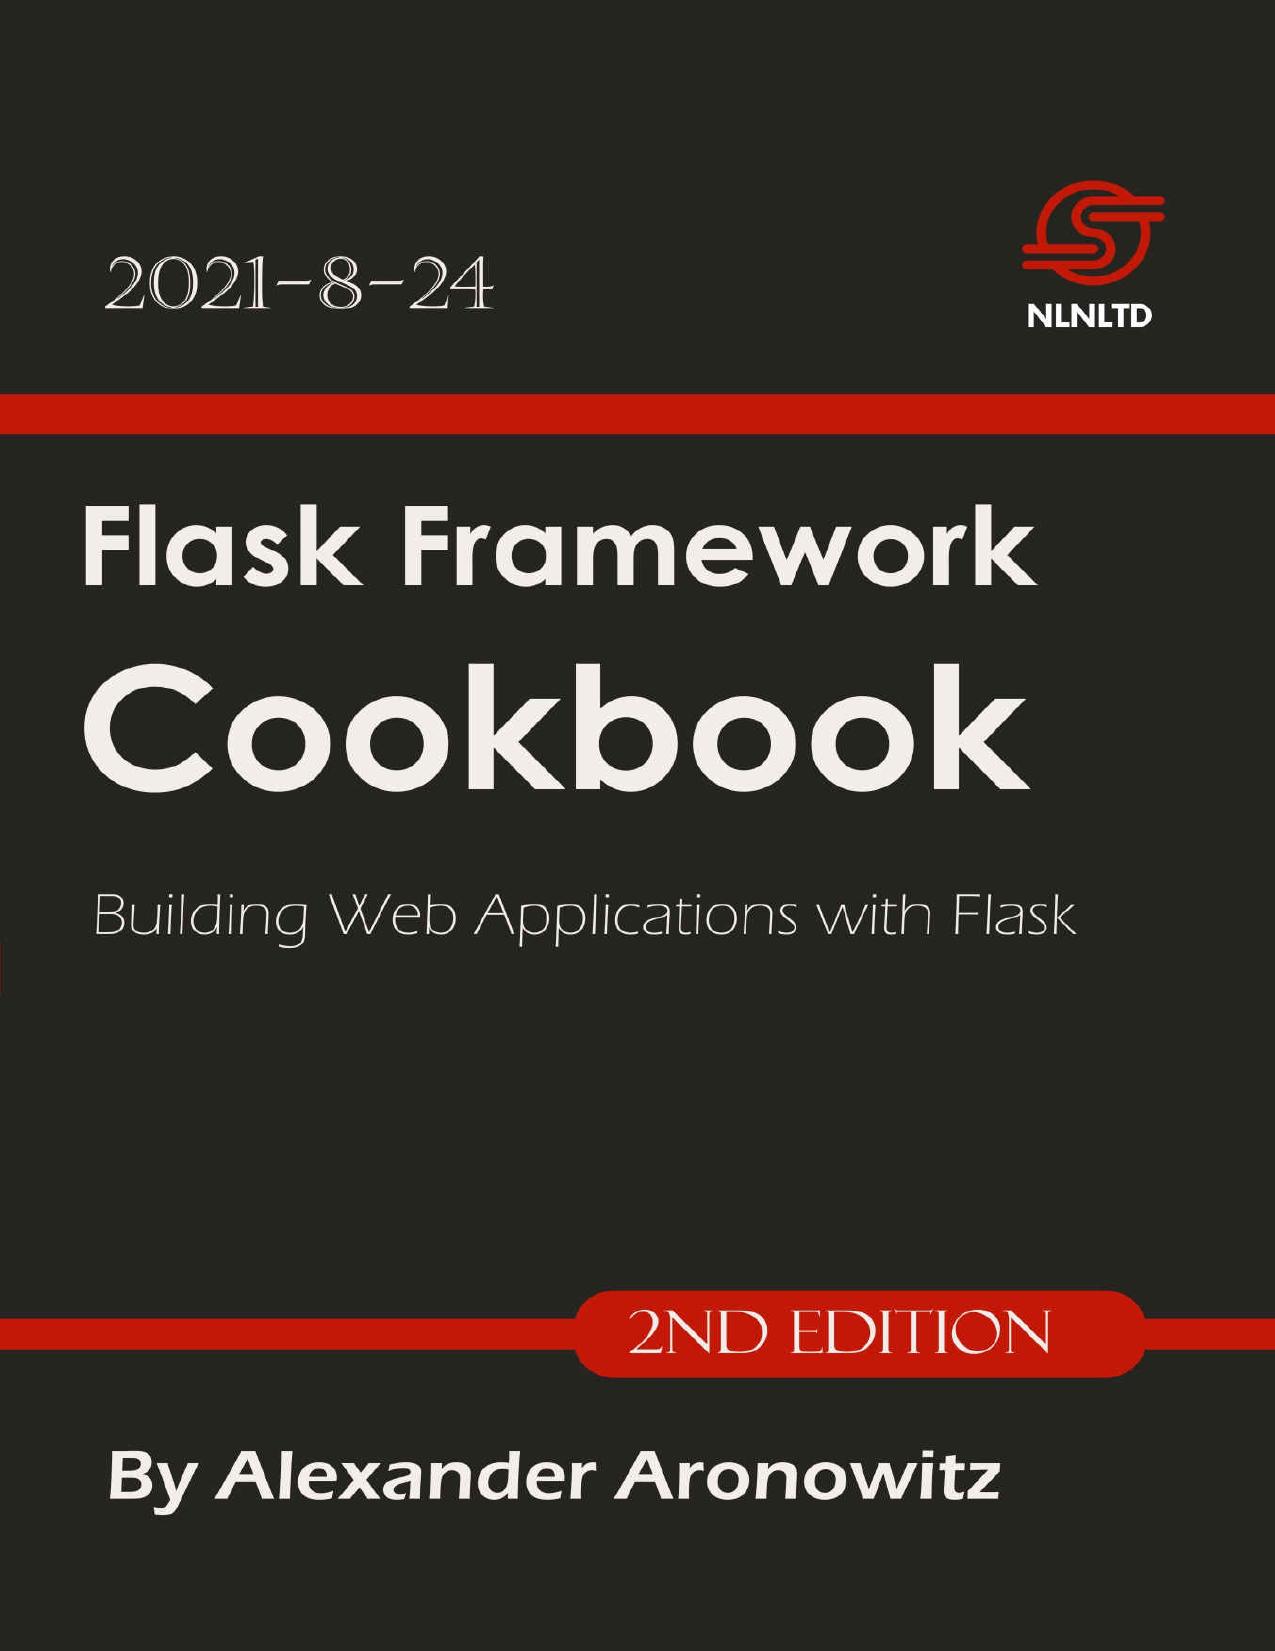 Flask Framework Cookbook: Building Web Applications With Flask, 2nd Edition